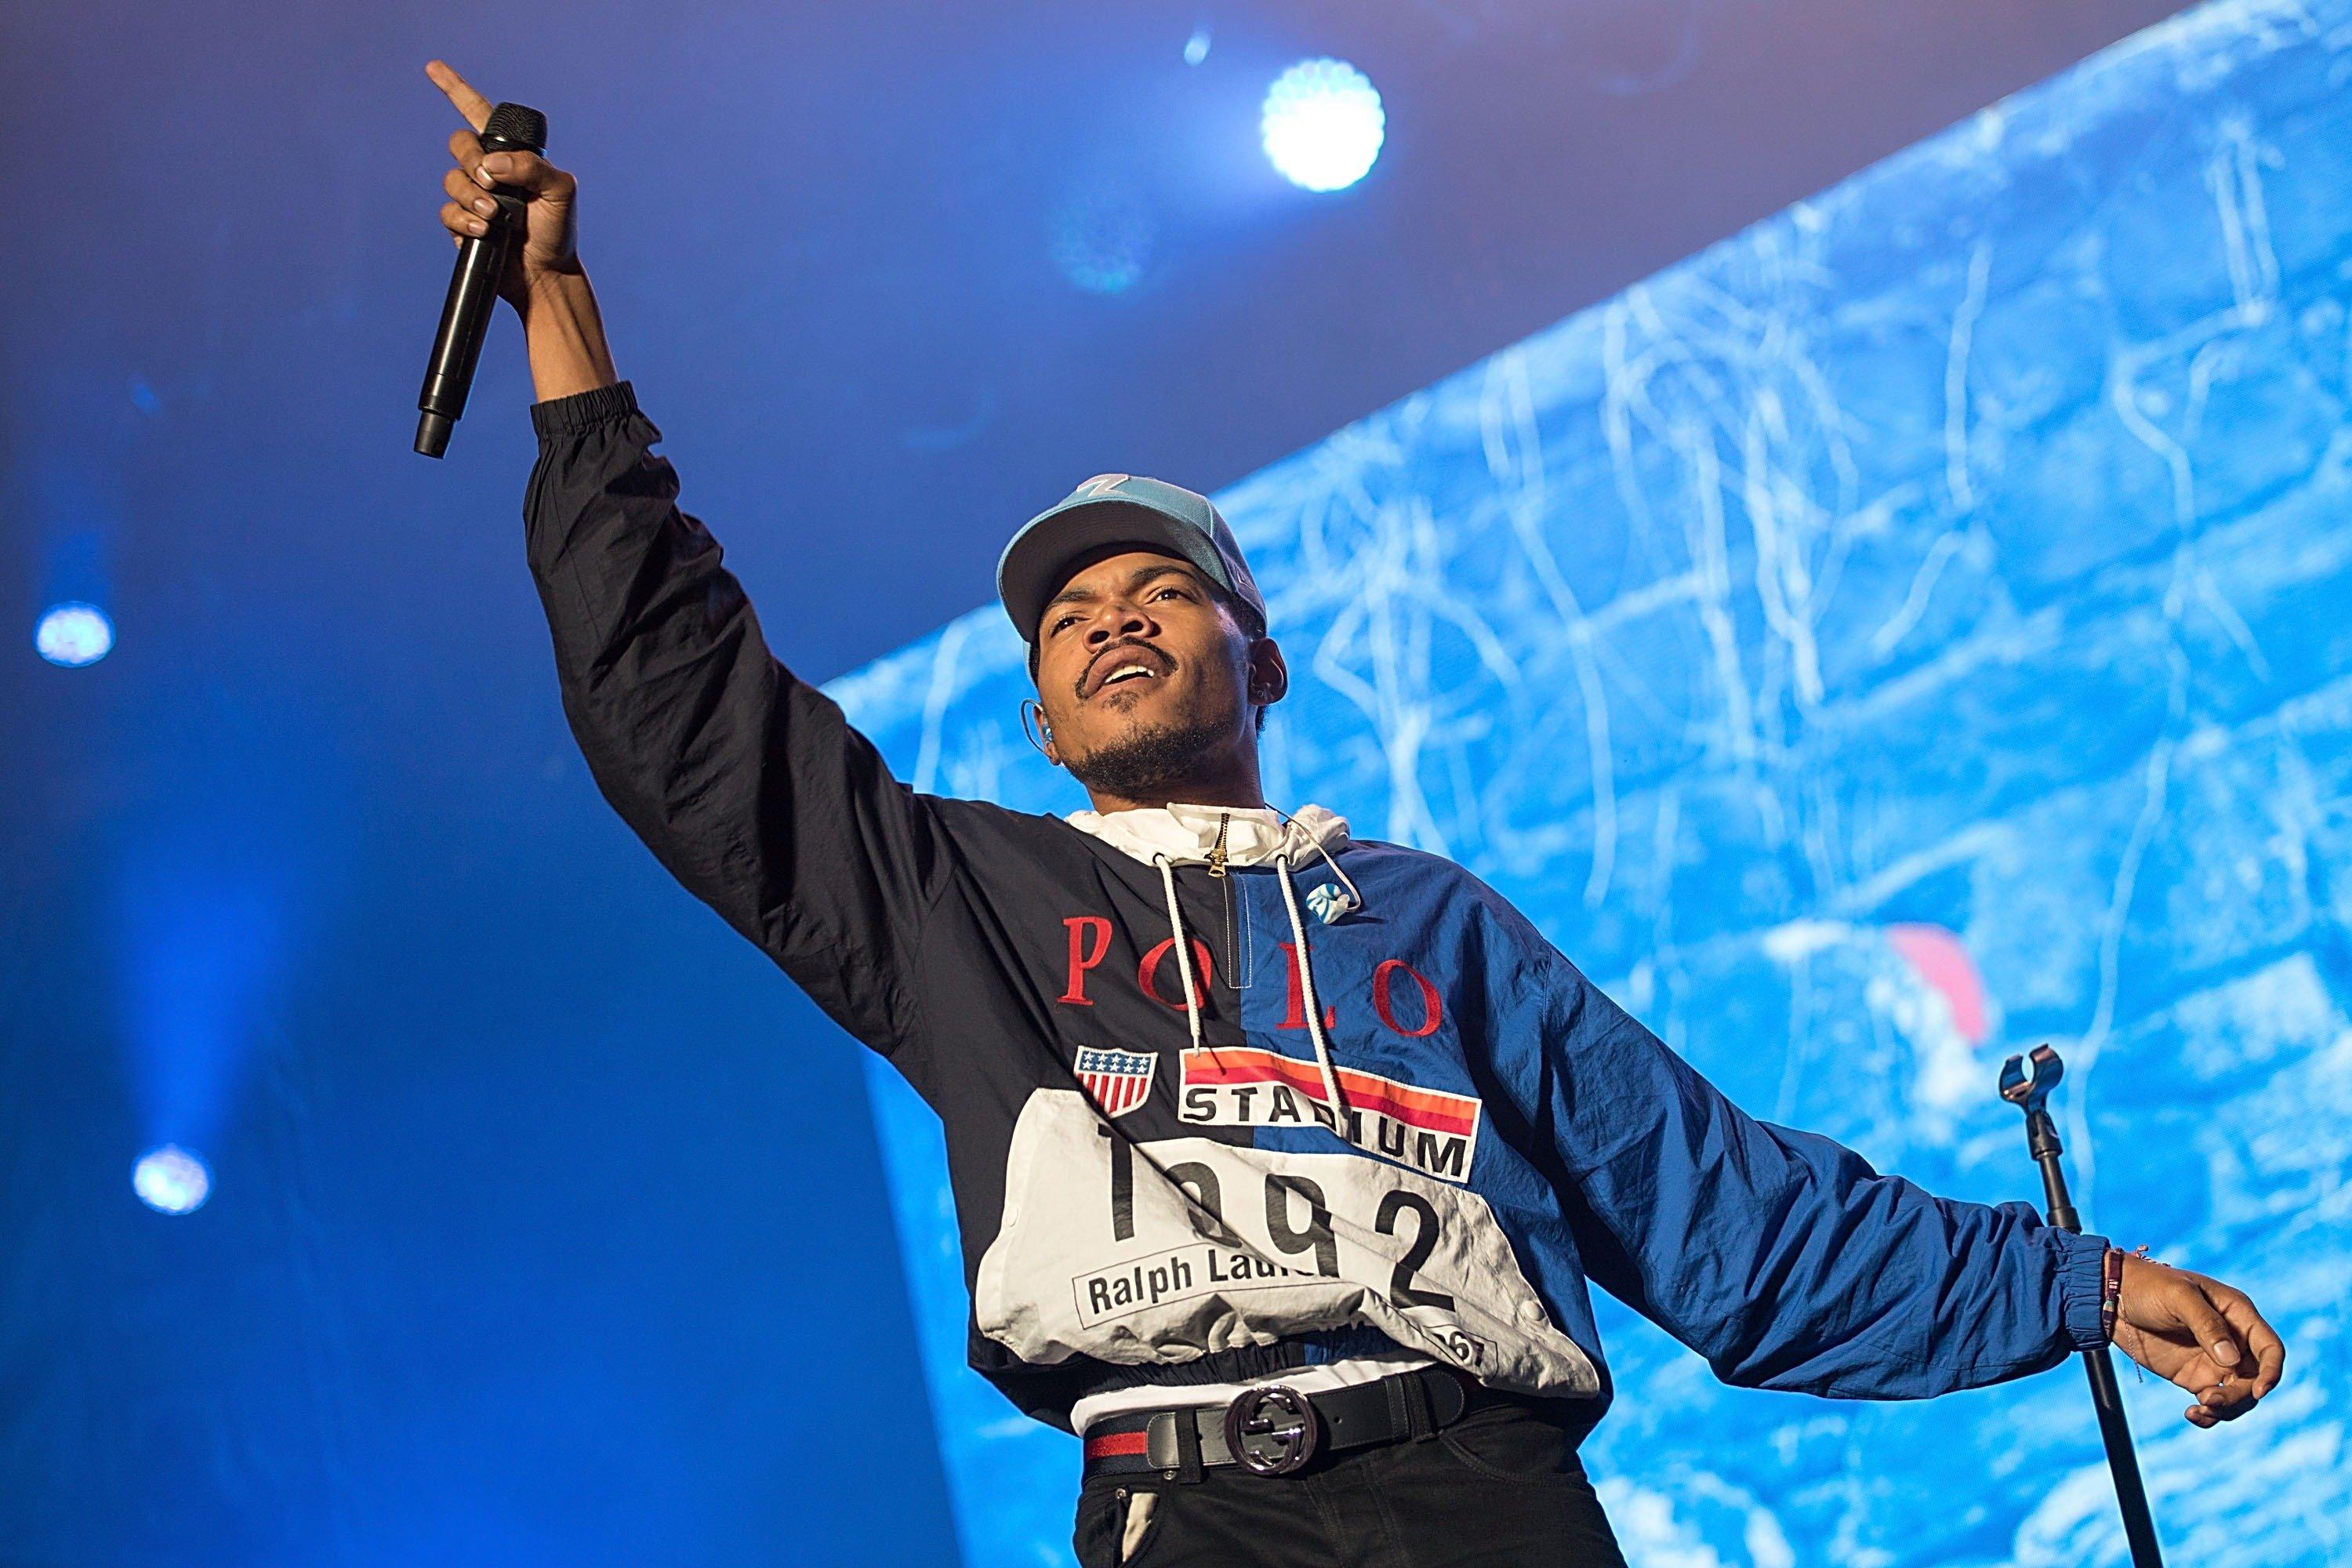 Chance The Rapper performs at 2017 Austin City Limits Music Festival